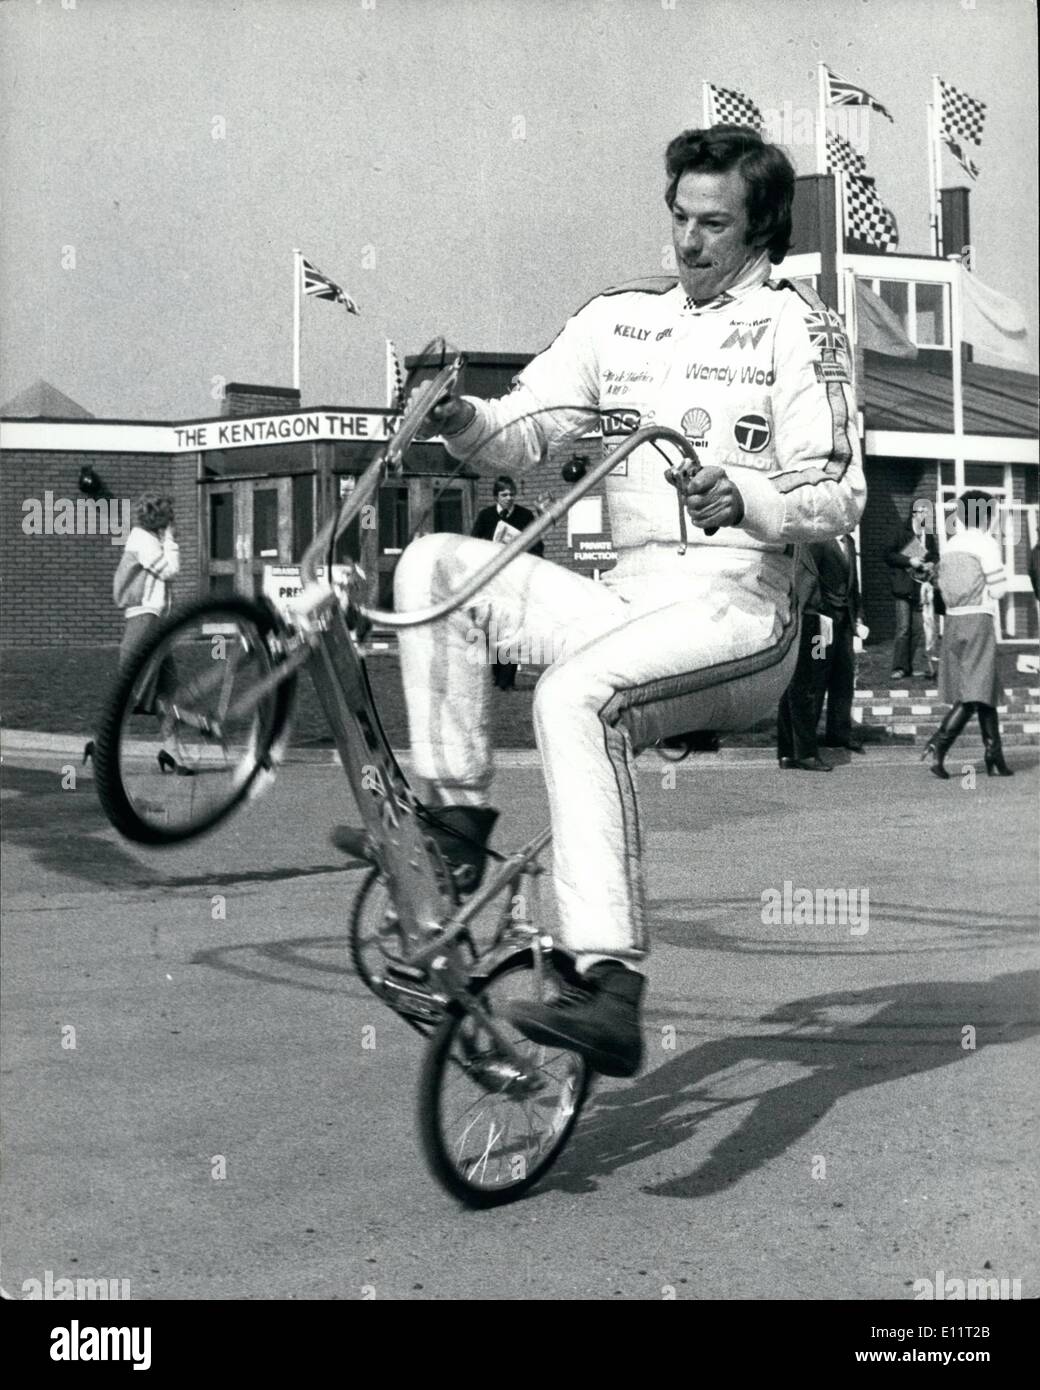 Feb. 02, 1980 - Stunt rider Mark:MARK THATCHER began his motor racing career with a bit of stunt riding on a bike, this was after the prime minister Championship at Brands Hatch next month. For the rest of the season he will compete in the special Formula Talbot single-seater race events. Photo shows Mark Thatcher seen during stunt cycle riding at Brands Hatch in Kent yesterday. Stock Photo